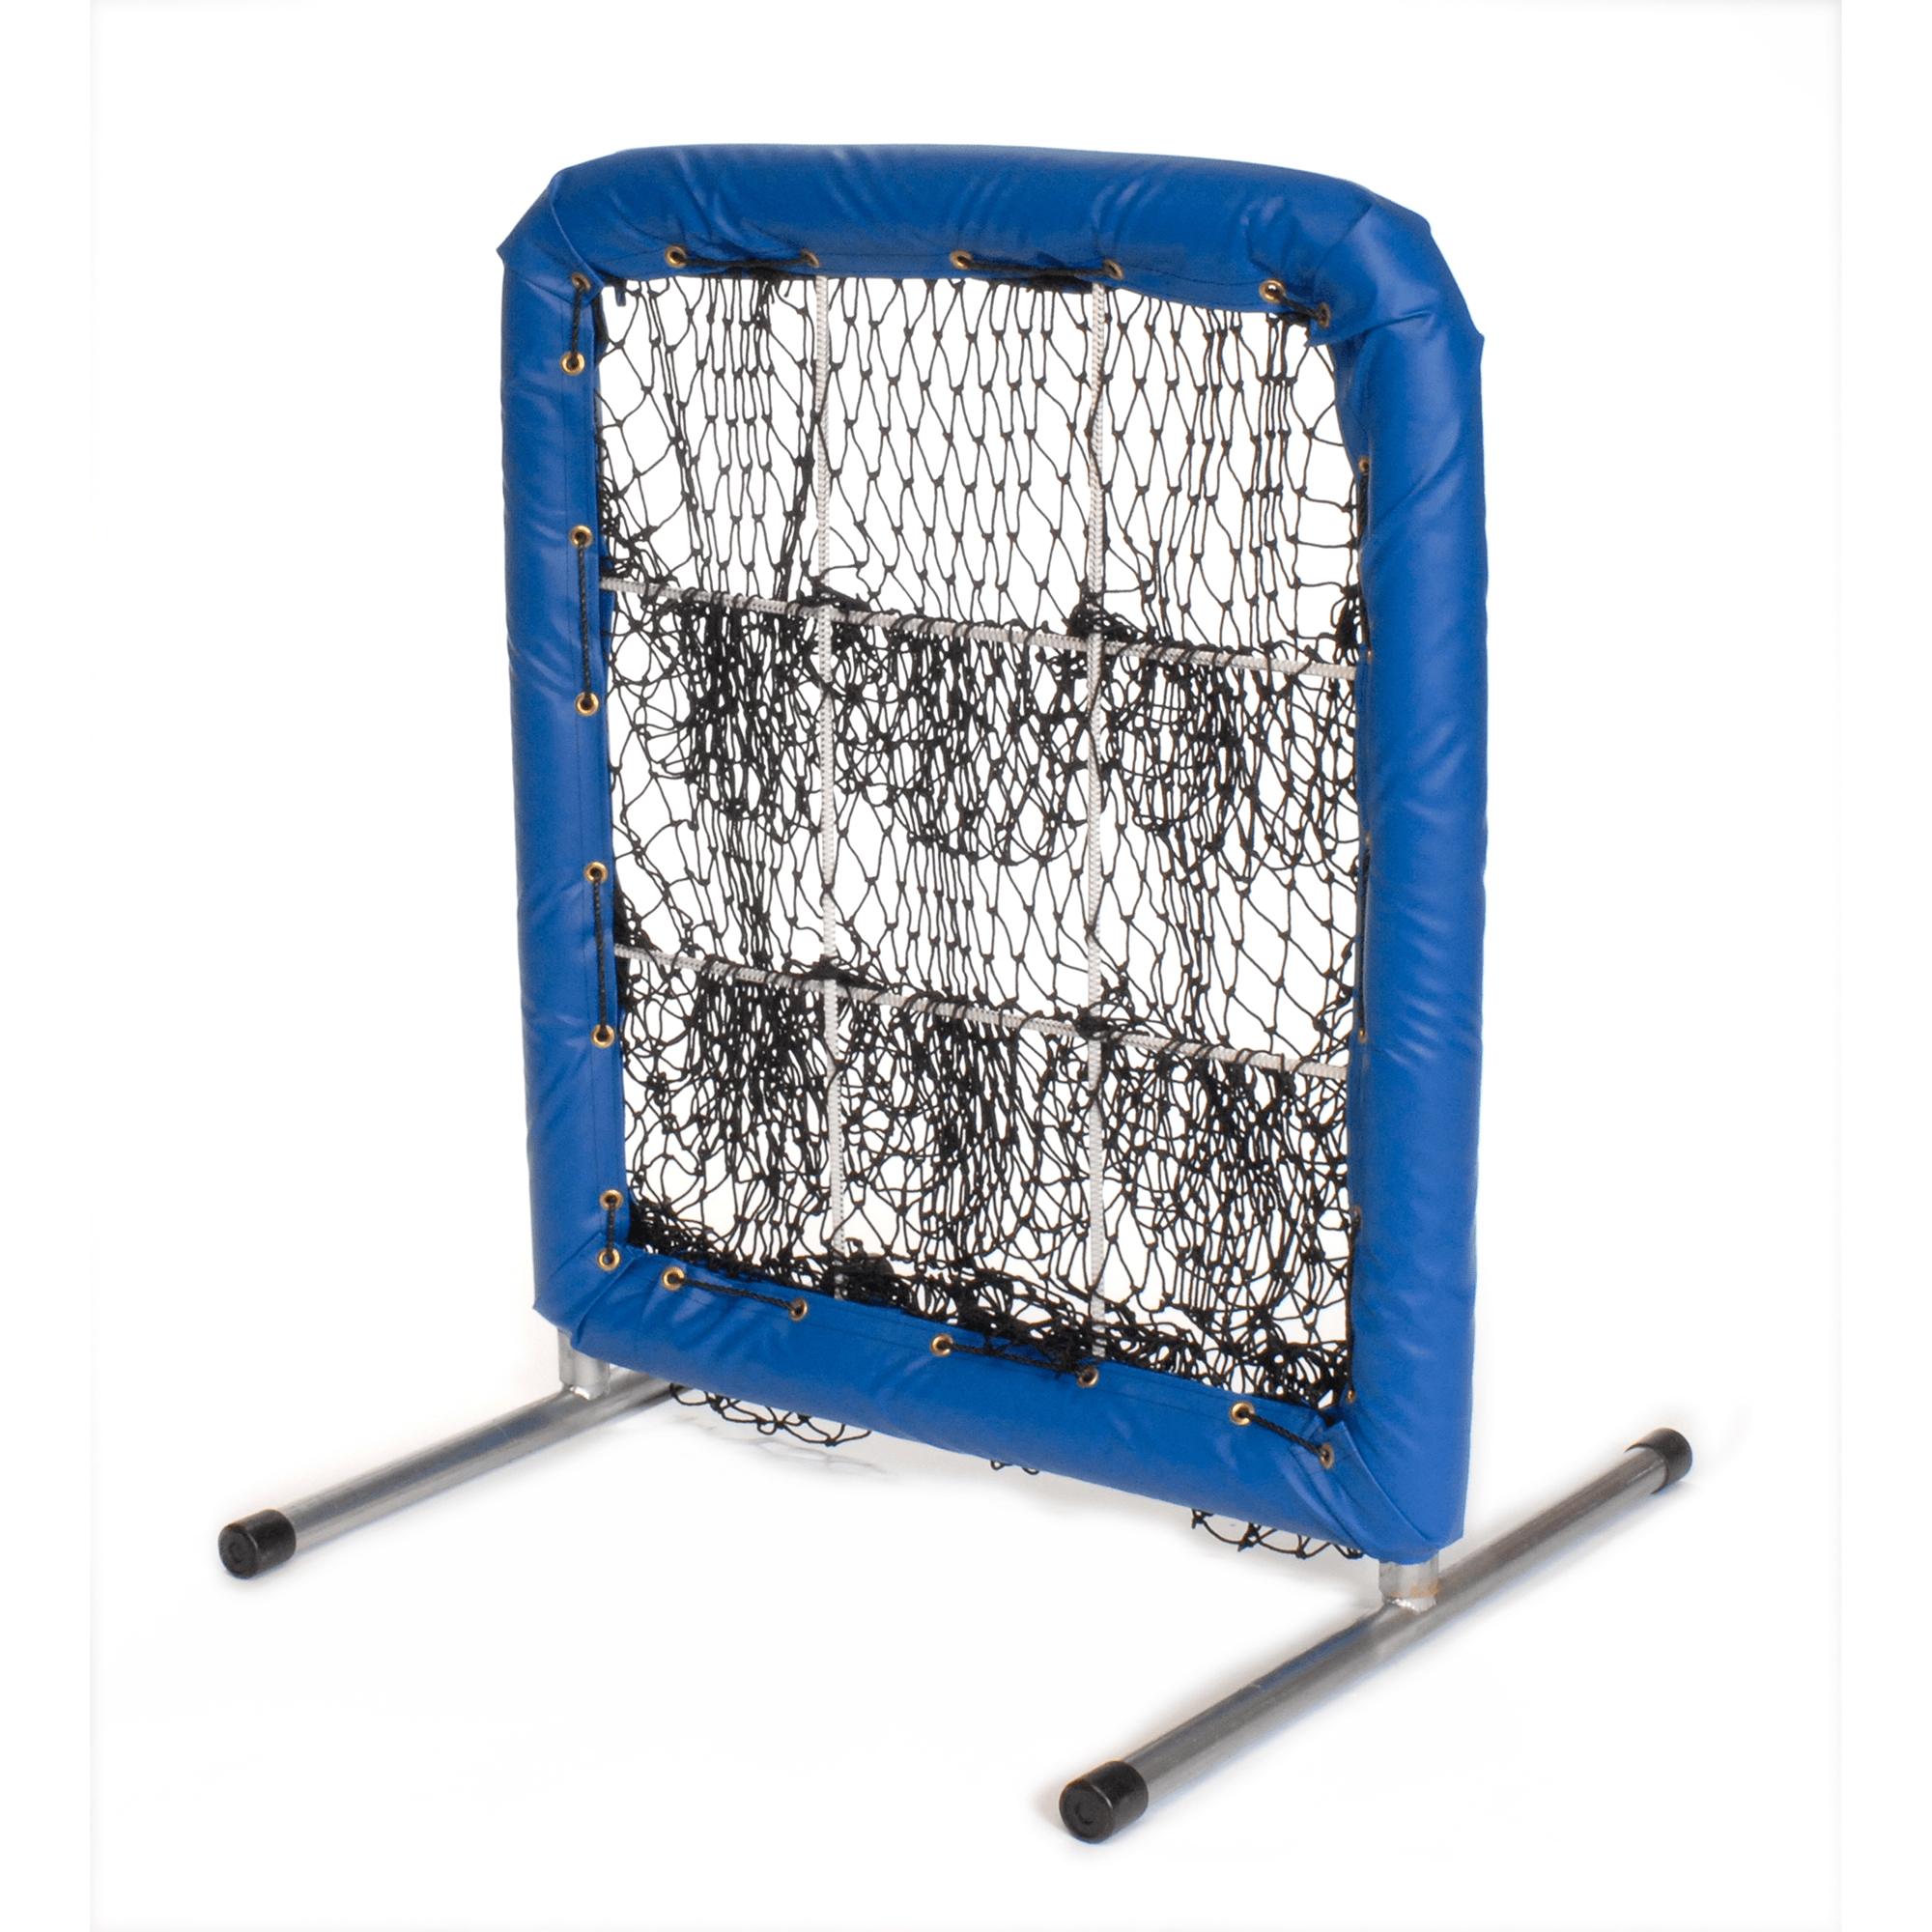 Pitcher's Pocket 9 Hole Pitching Aid for Baseball